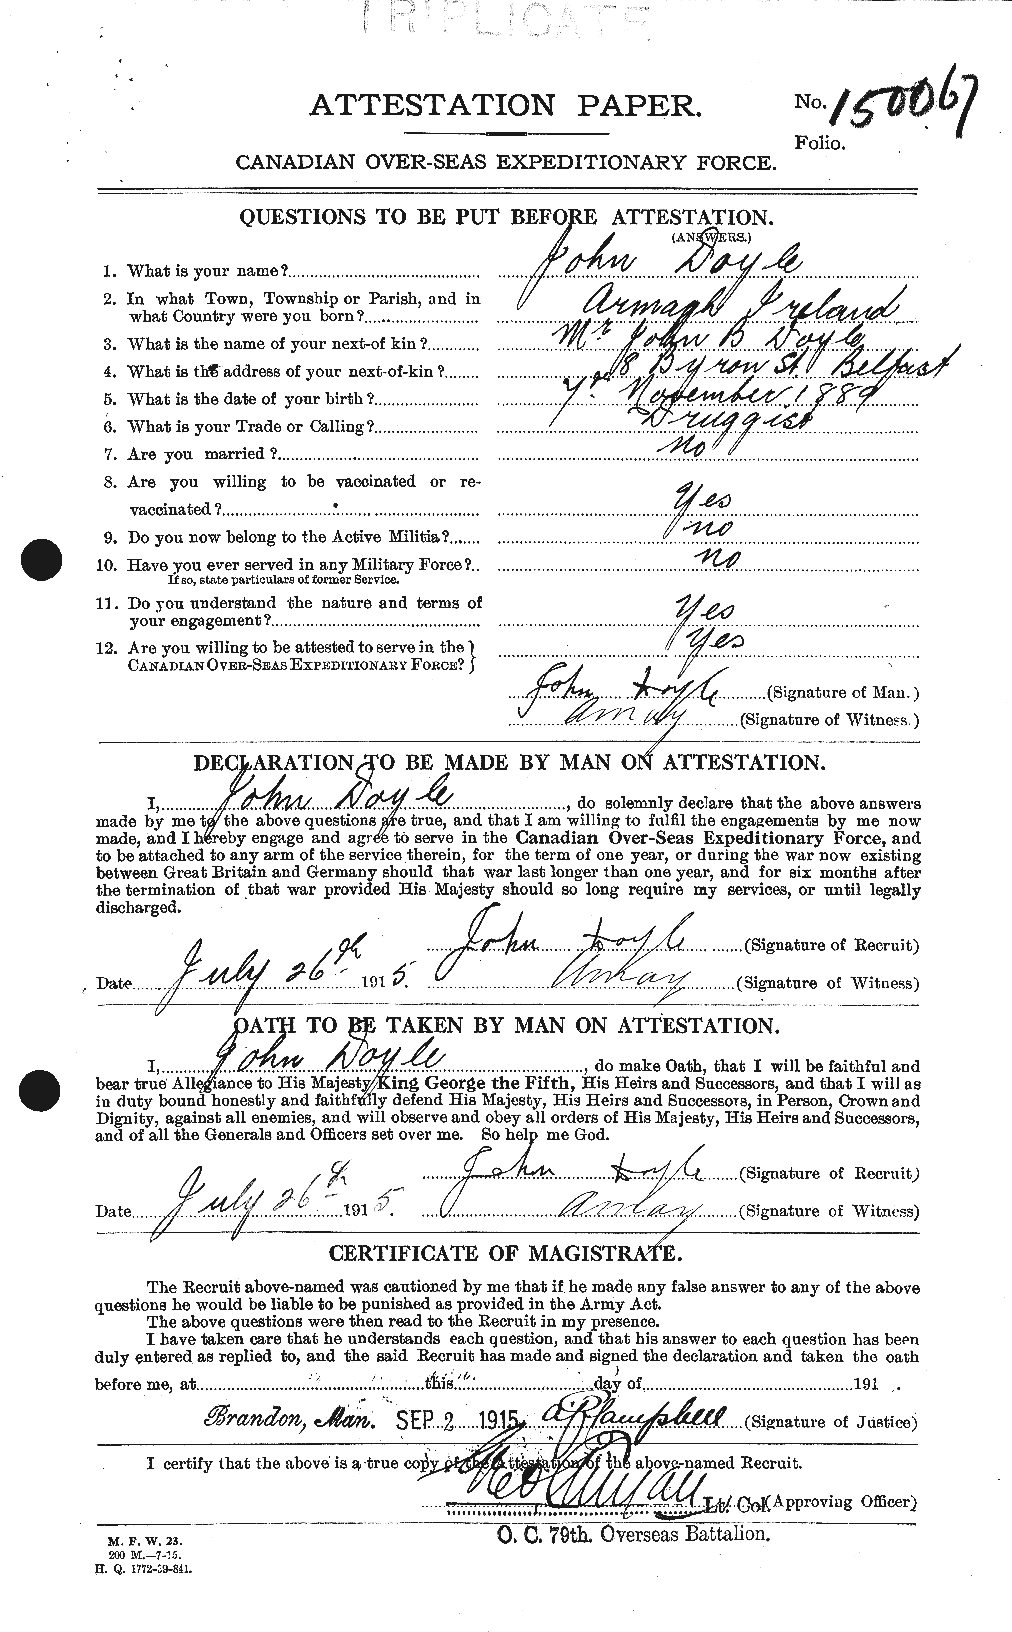 Personnel Records of the First World War - CEF 298570a